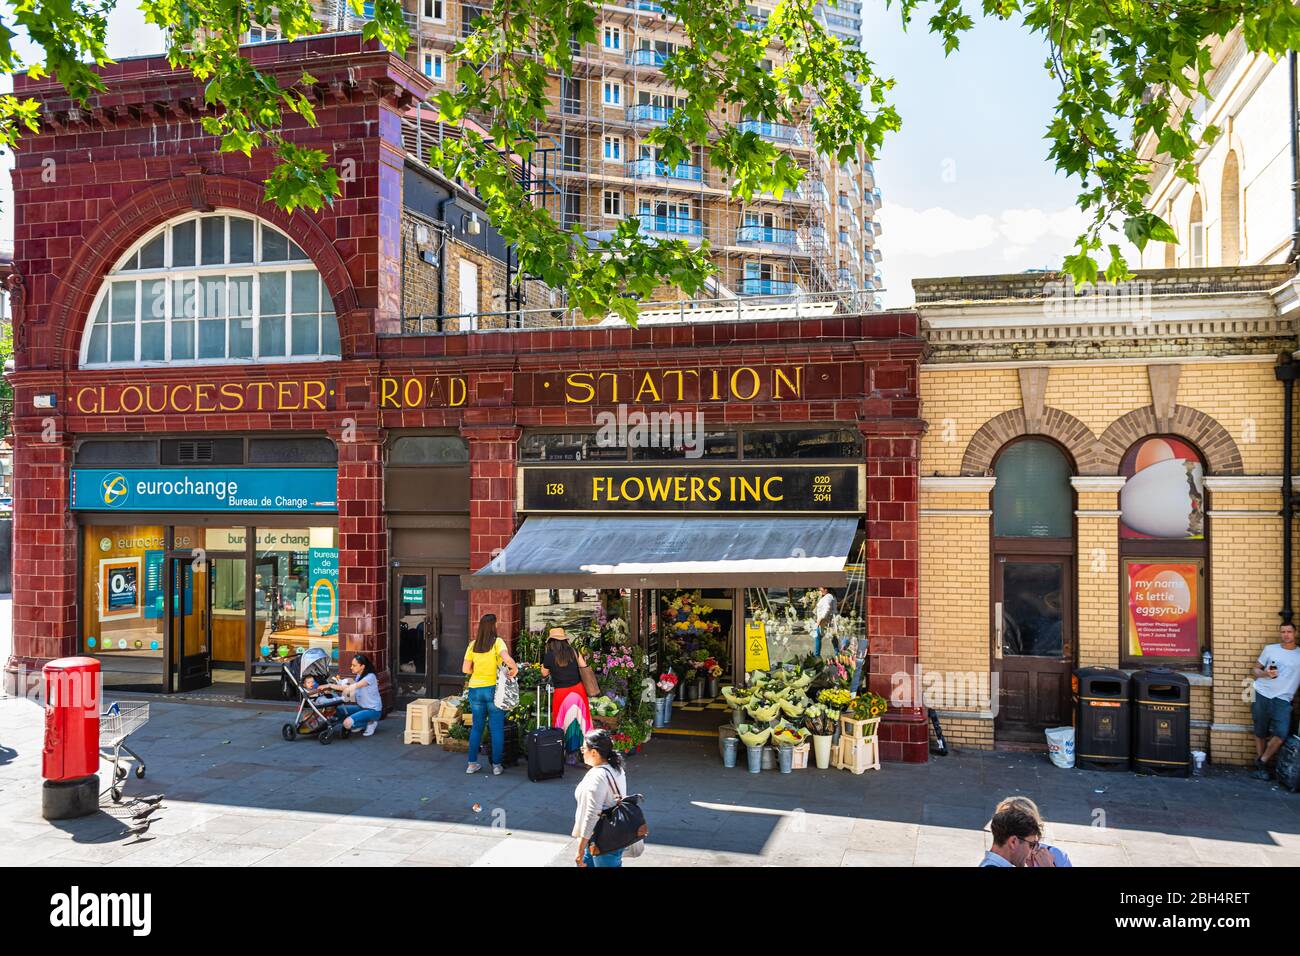 London, UK - June 22, 2018: Neighborhood of south Kensington with Gloucester road station sign during summer day above view and flower shop Stock Photo